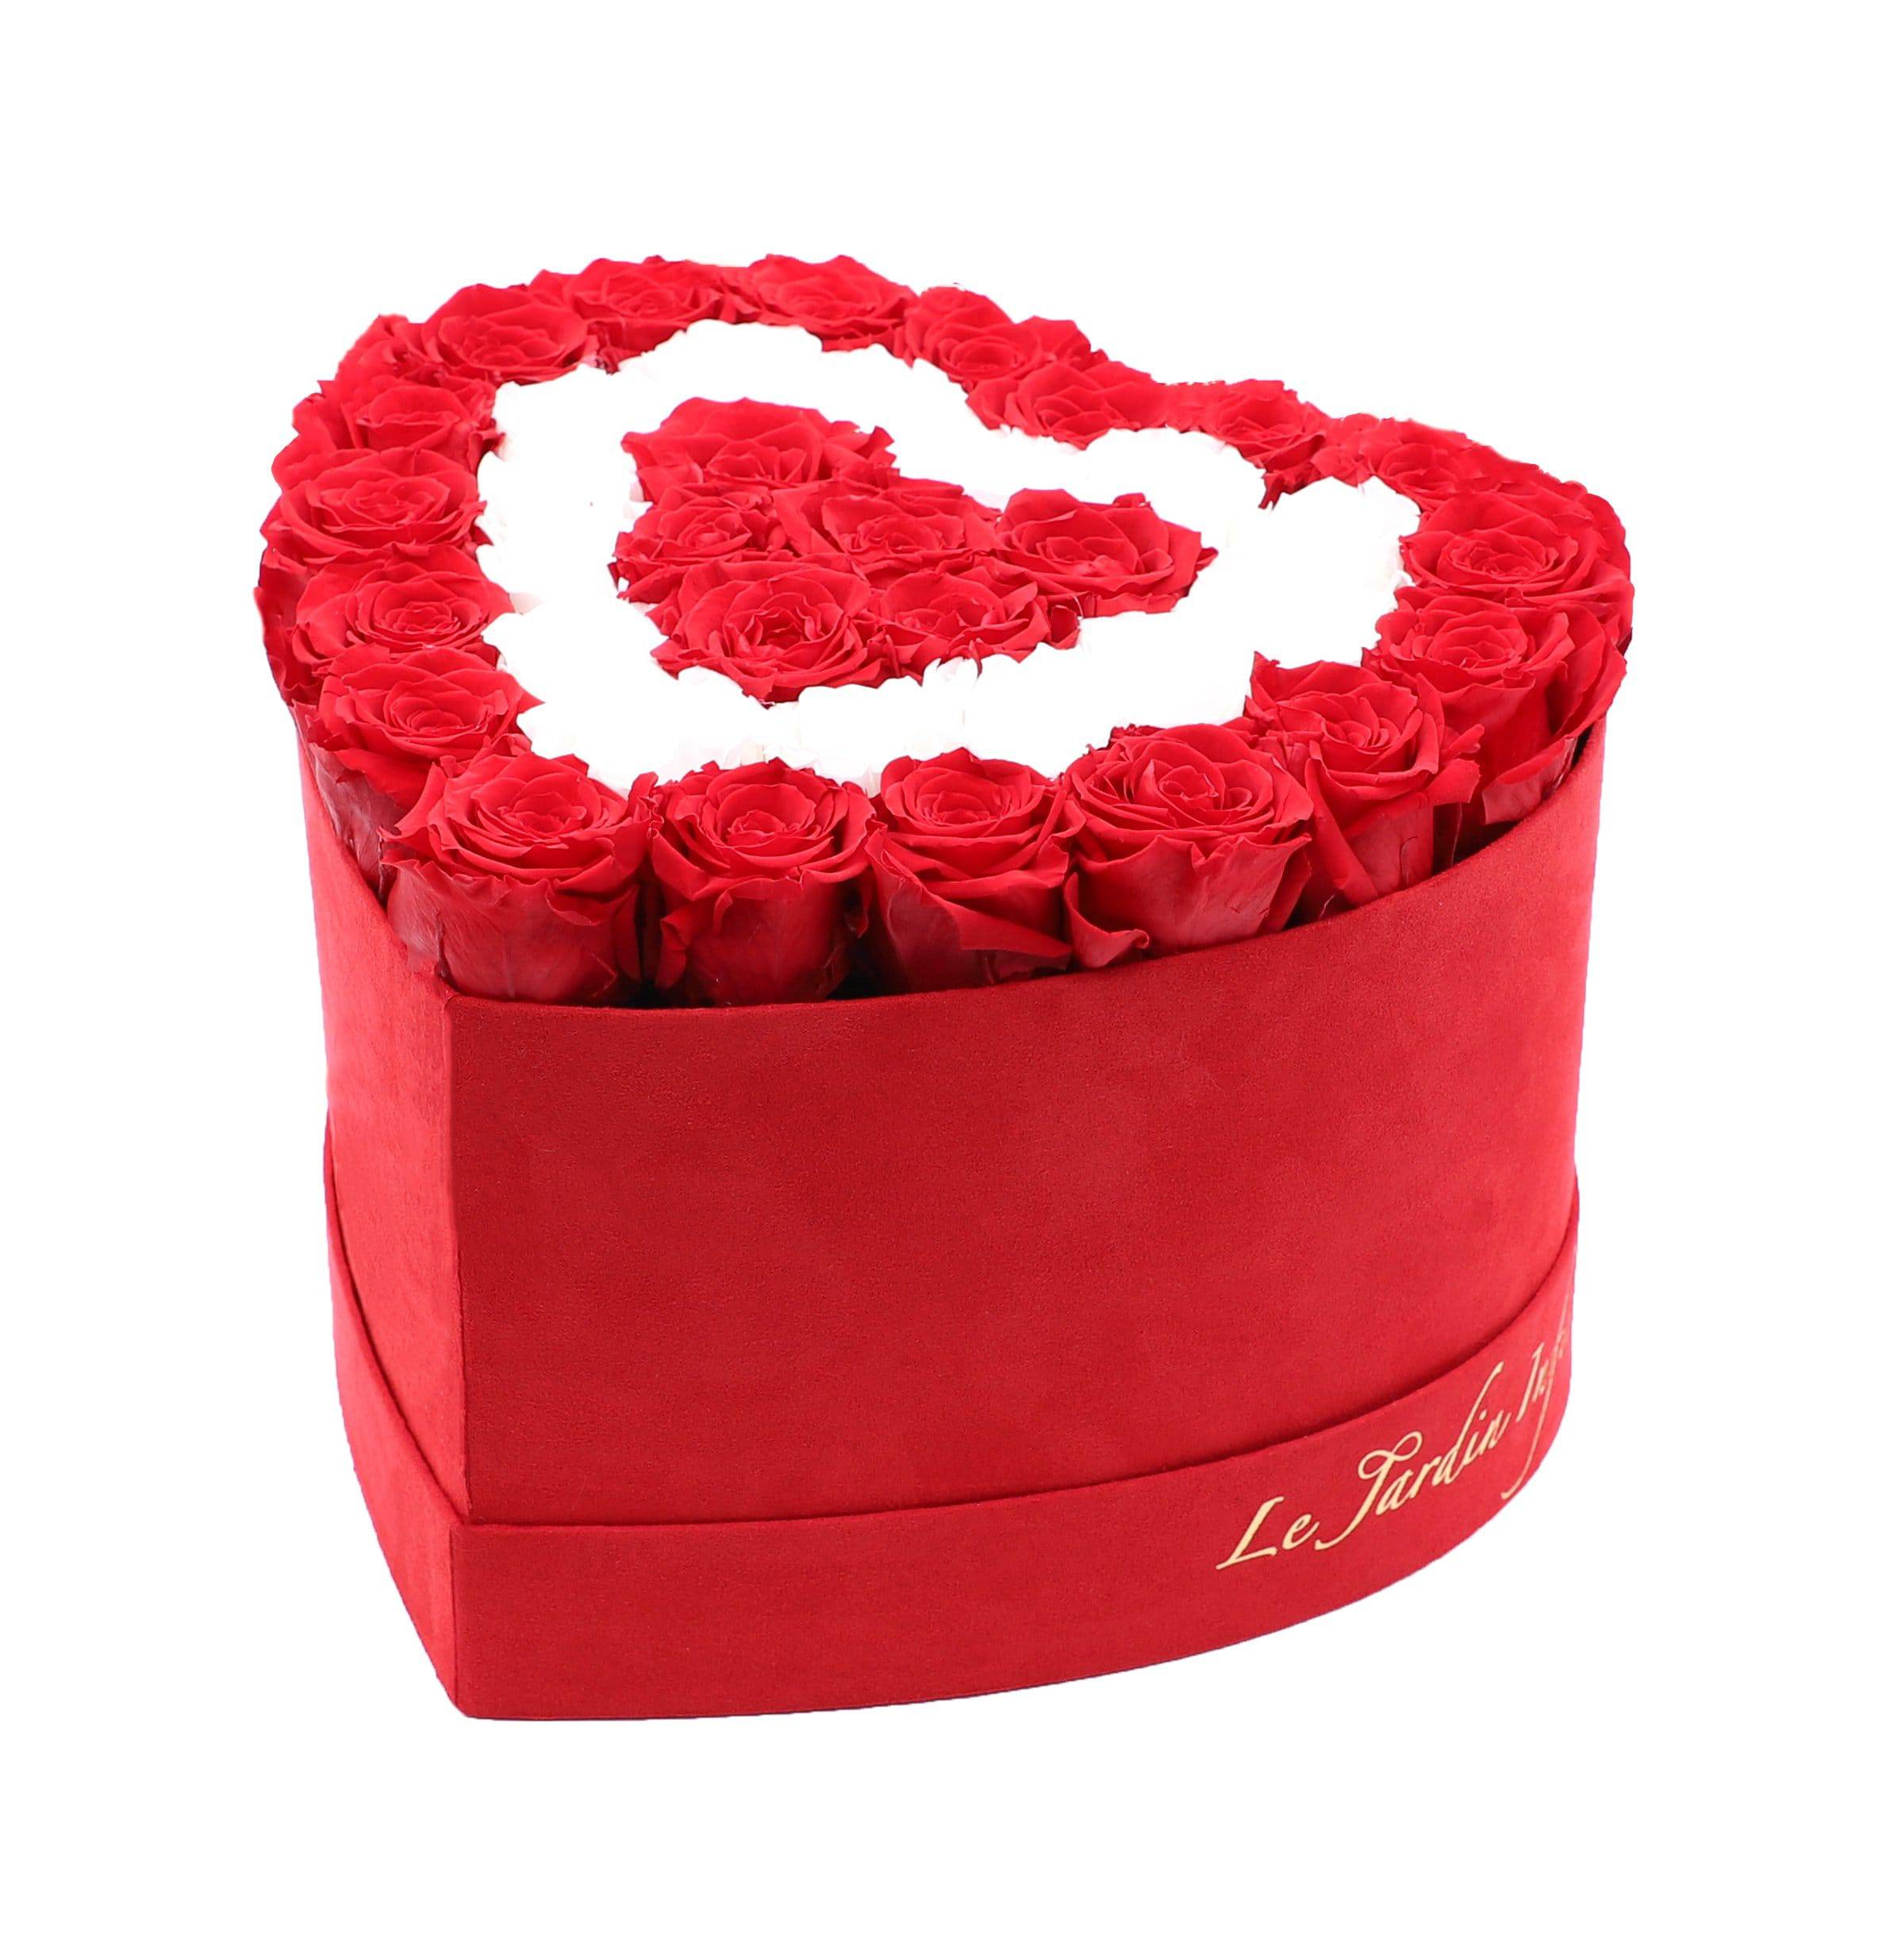 Mouind Heart-shape Rose Flower Gift Box Festival Wedding Decoration for  Valentine's Day Birthday Gift，12 inch Rose Heart，Without Box